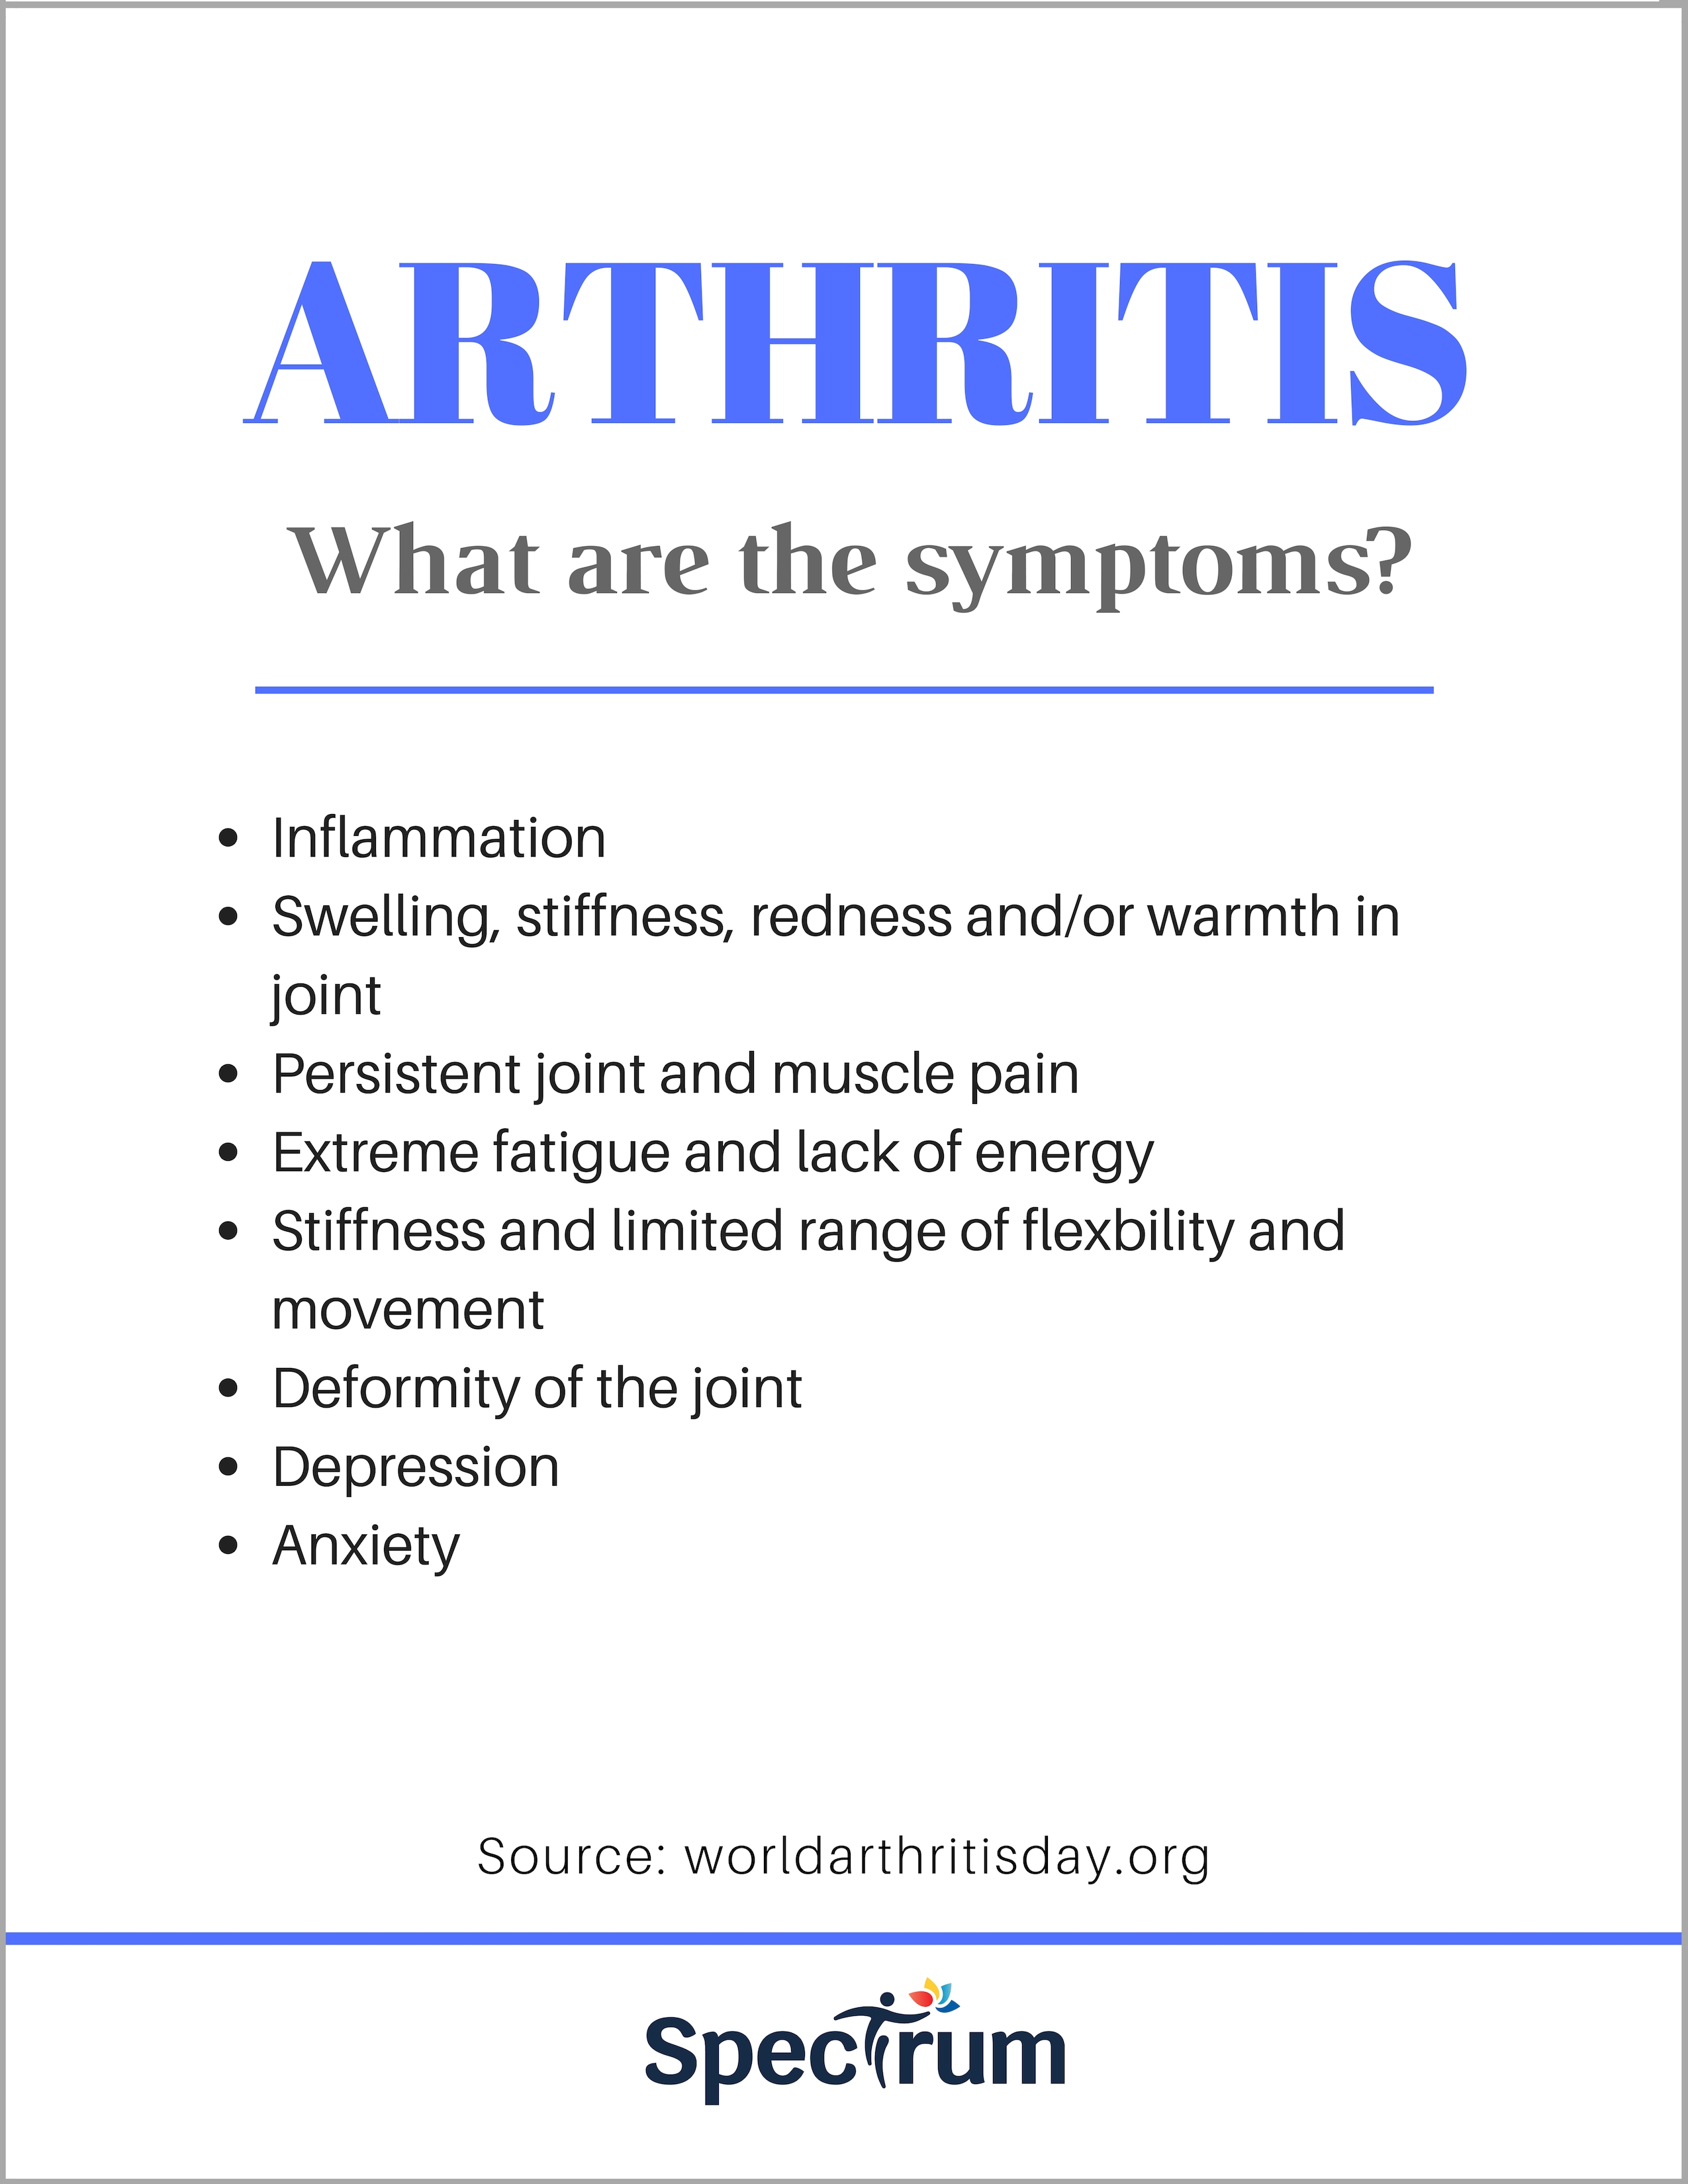 Image: Today is World Arthritis Day!